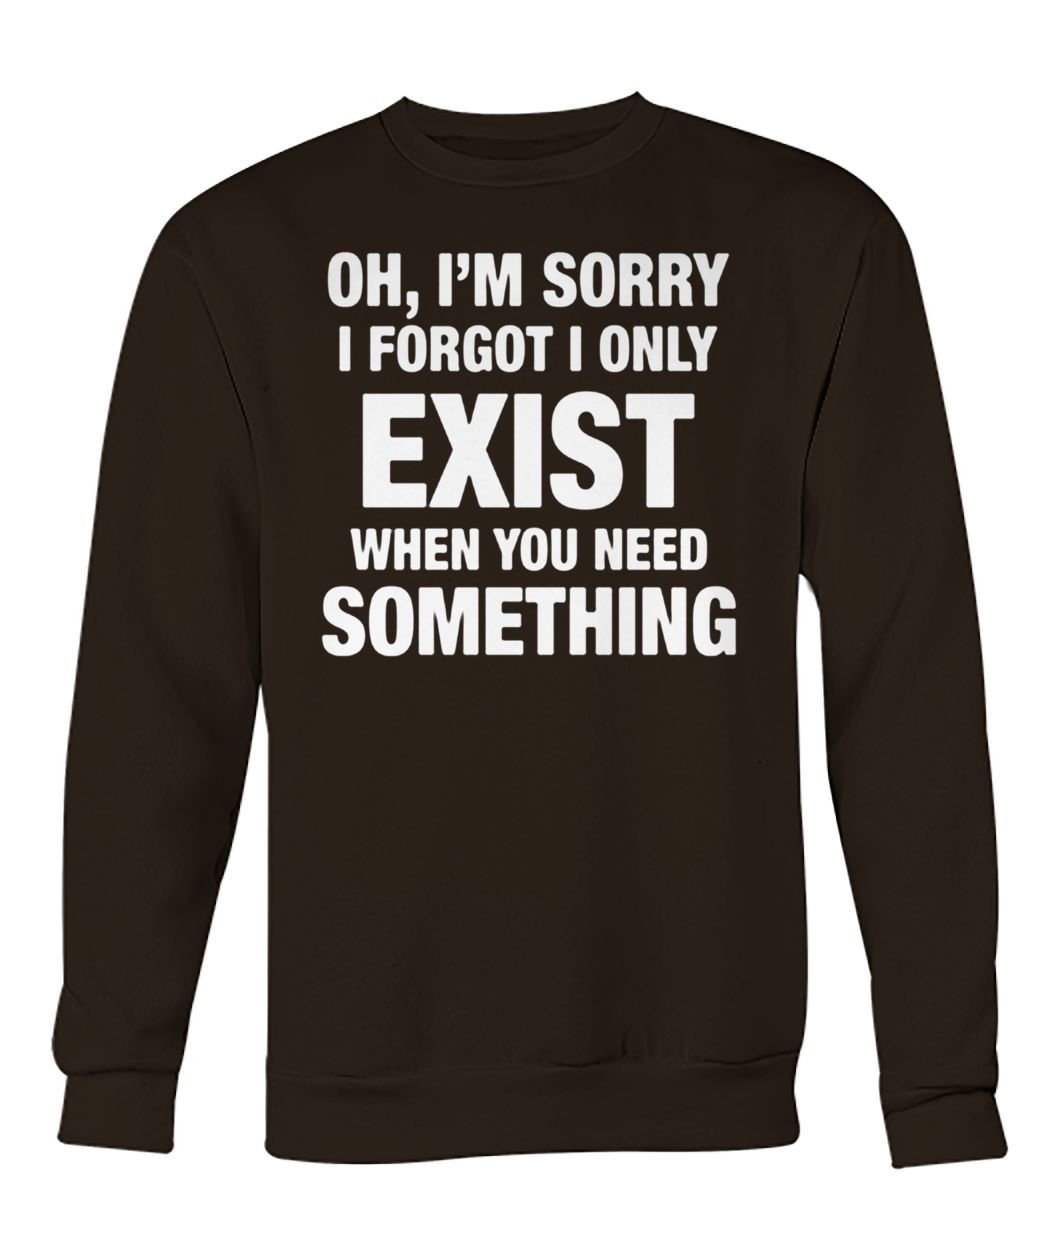 Oh I'm sorry I forgot I only exist when you need something crew neck sweatshirt